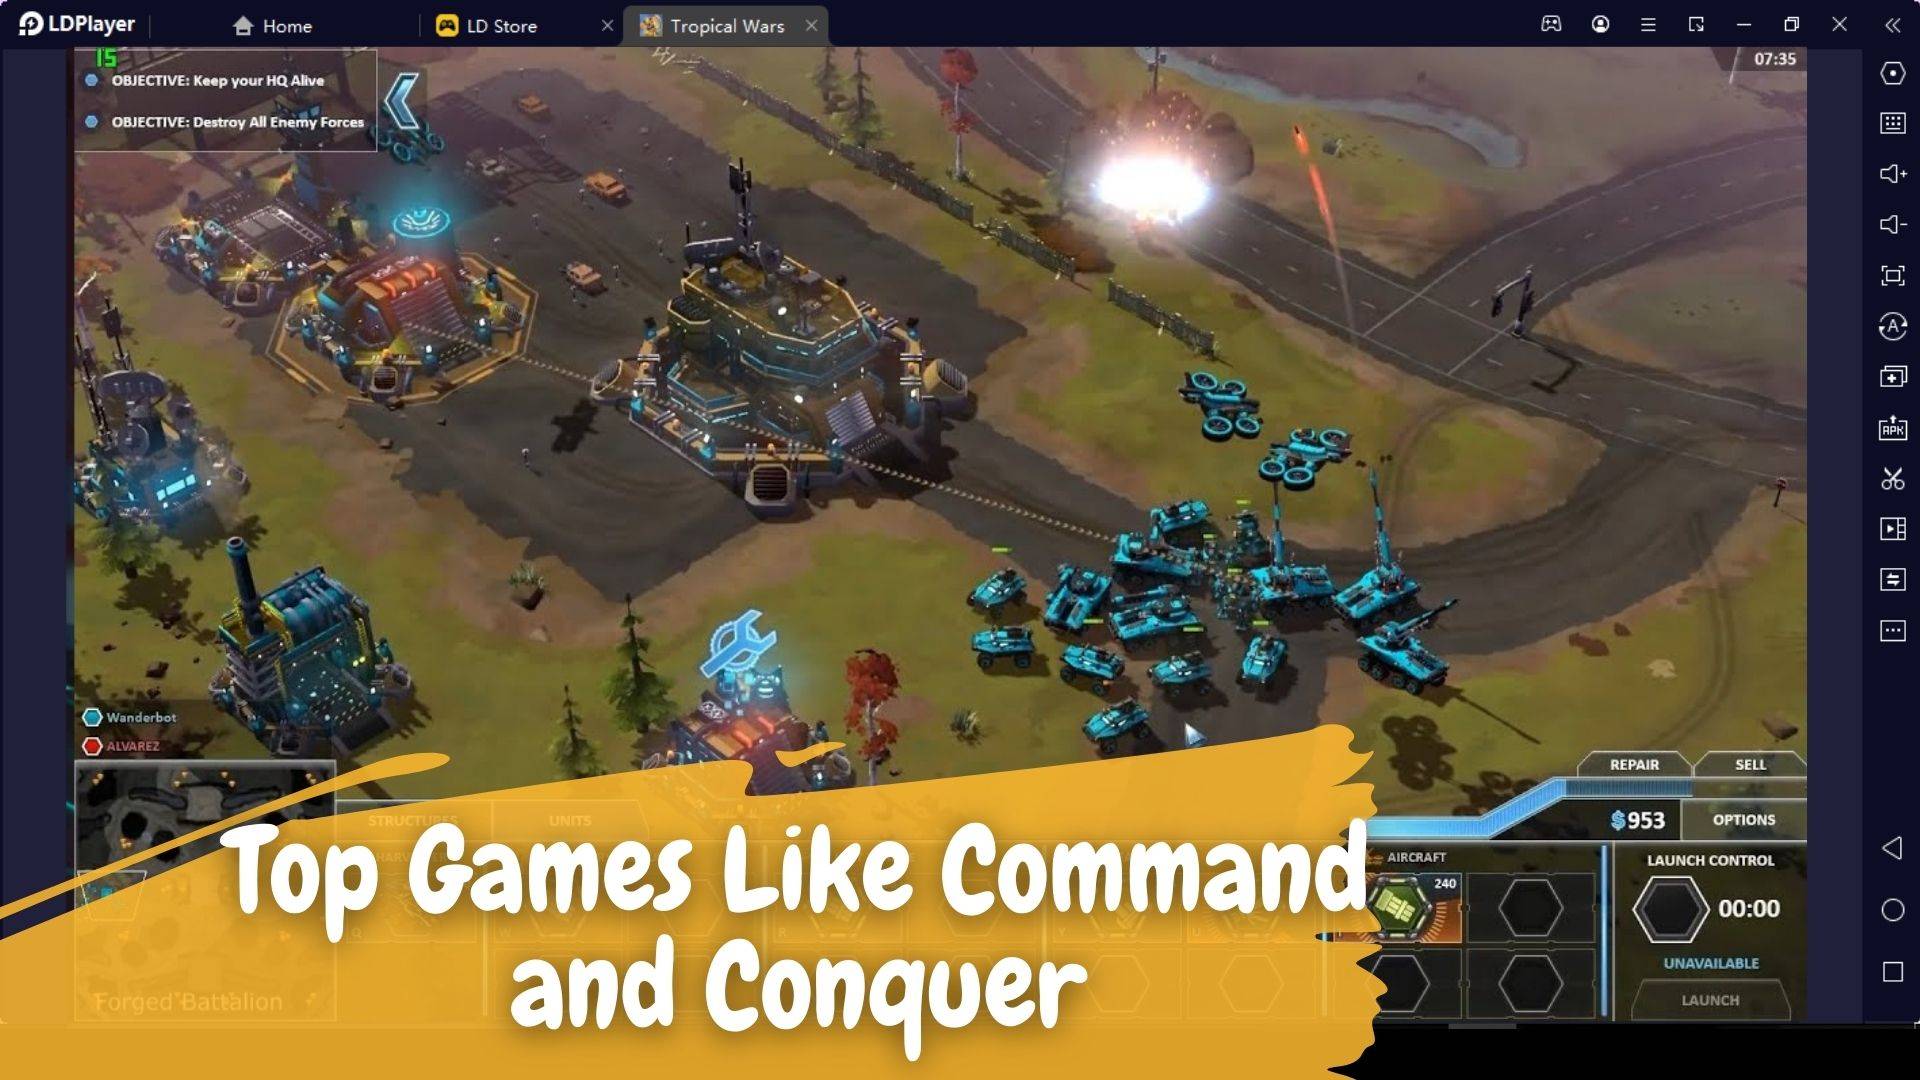 Top Games Like Command and ConquerLDPlayer's ChoiceLDPlayer